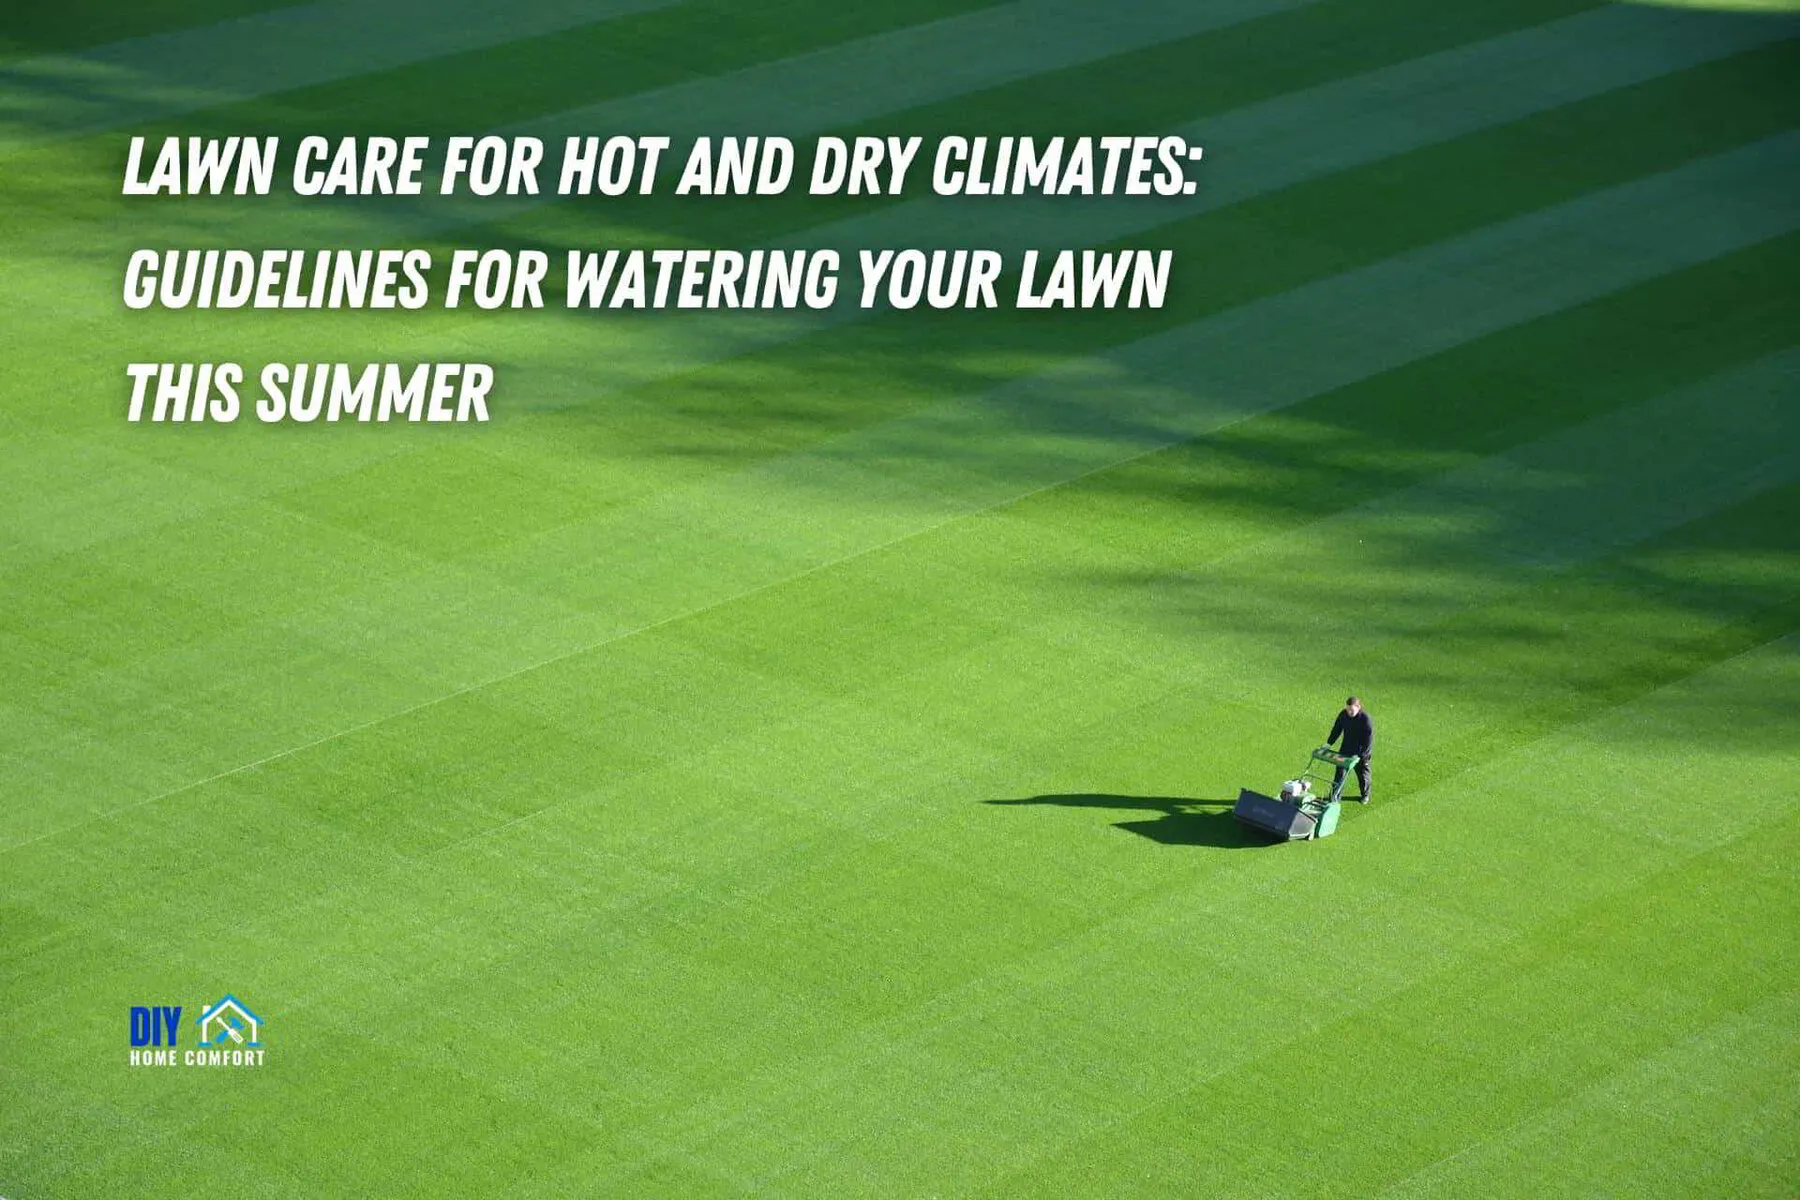 Lawn Care for Hot and Dry Climates: Guidelines for Watering Your Lawn This Summer | DIY Home Comfort